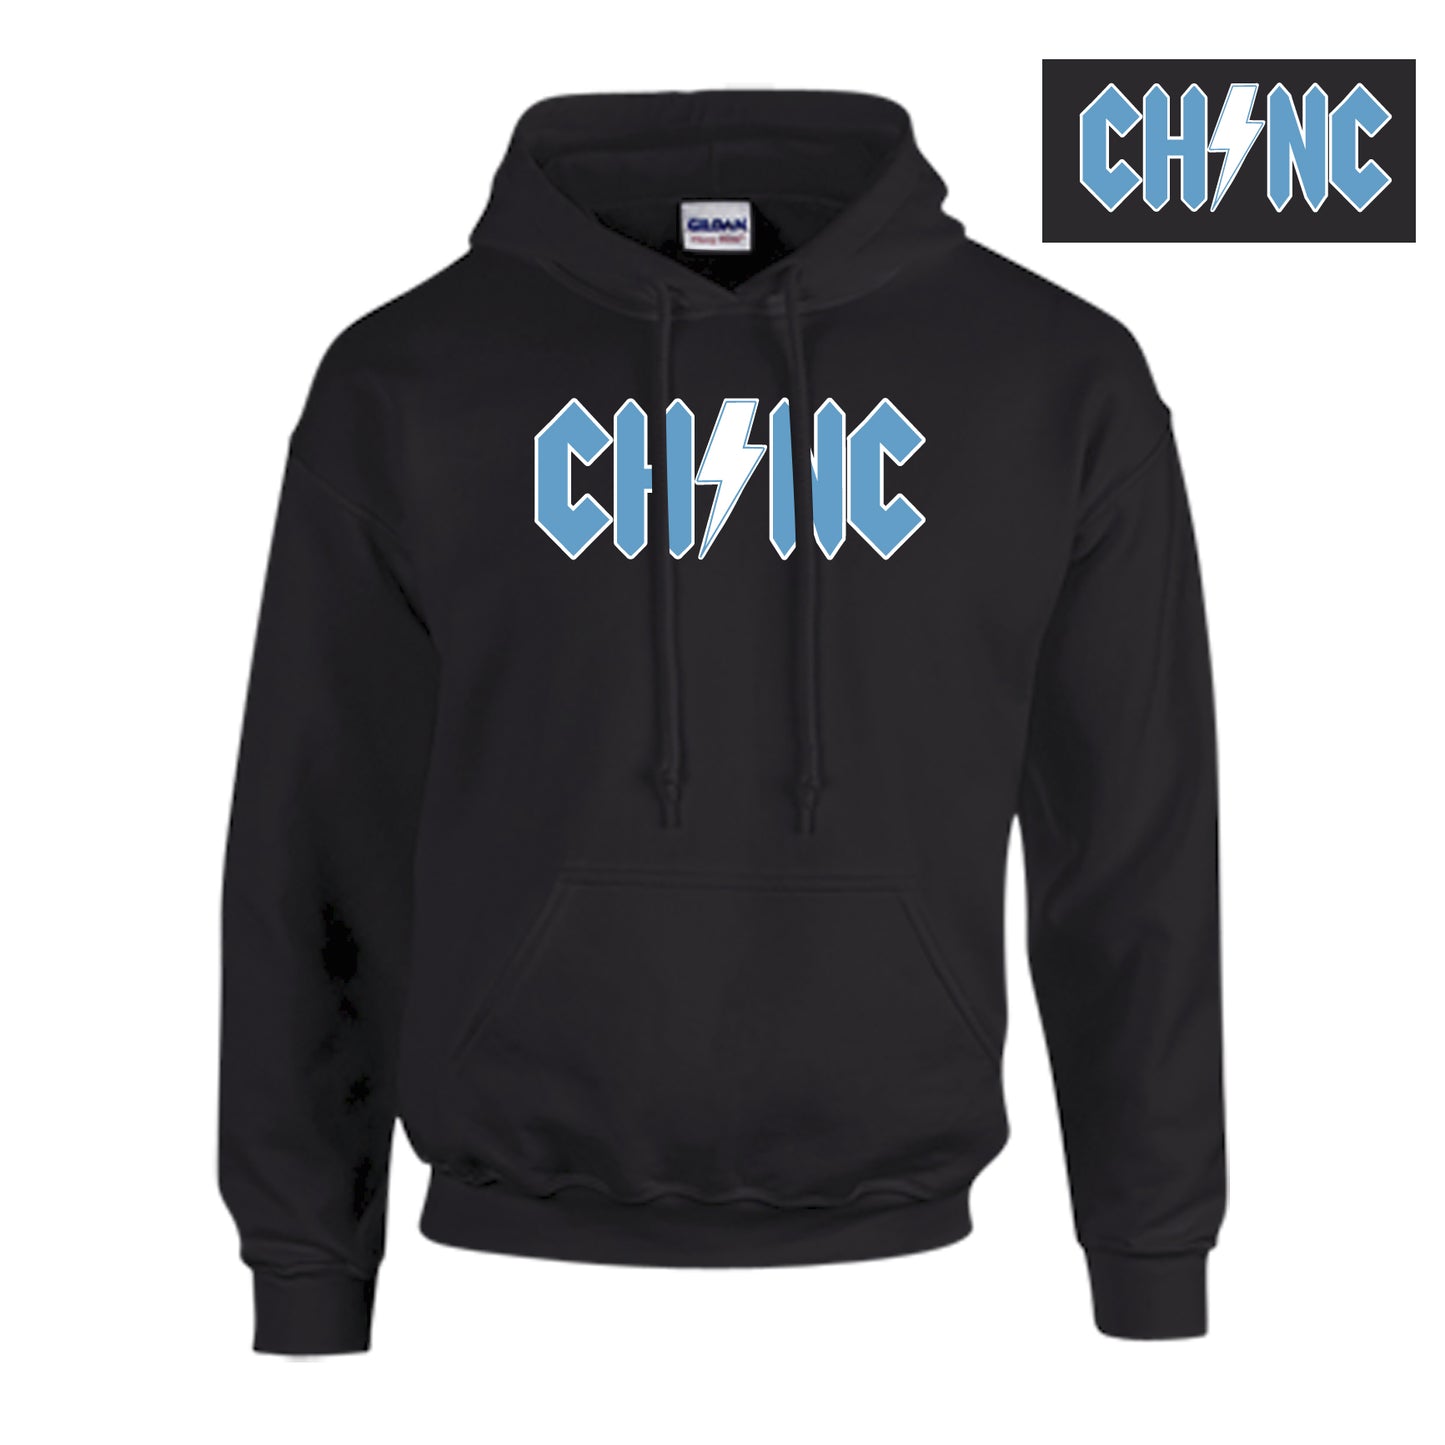 Chapel Hill North Carolina Hoodie in Black with Rock Font